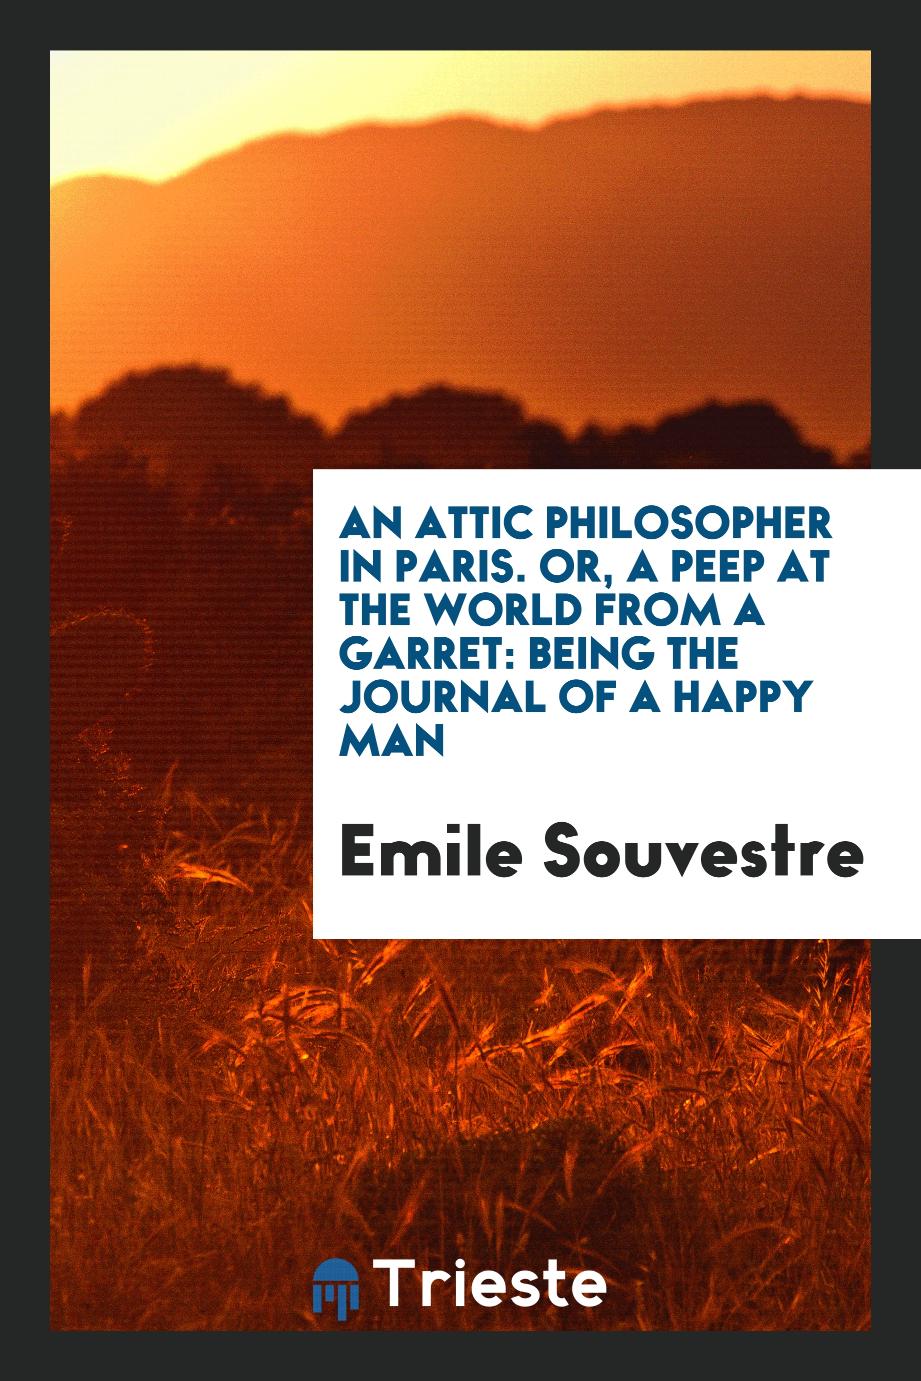 An Attic Philosopher in Paris. Or, a Peep at the World from a Garret: Being the Journal of a Happy Man